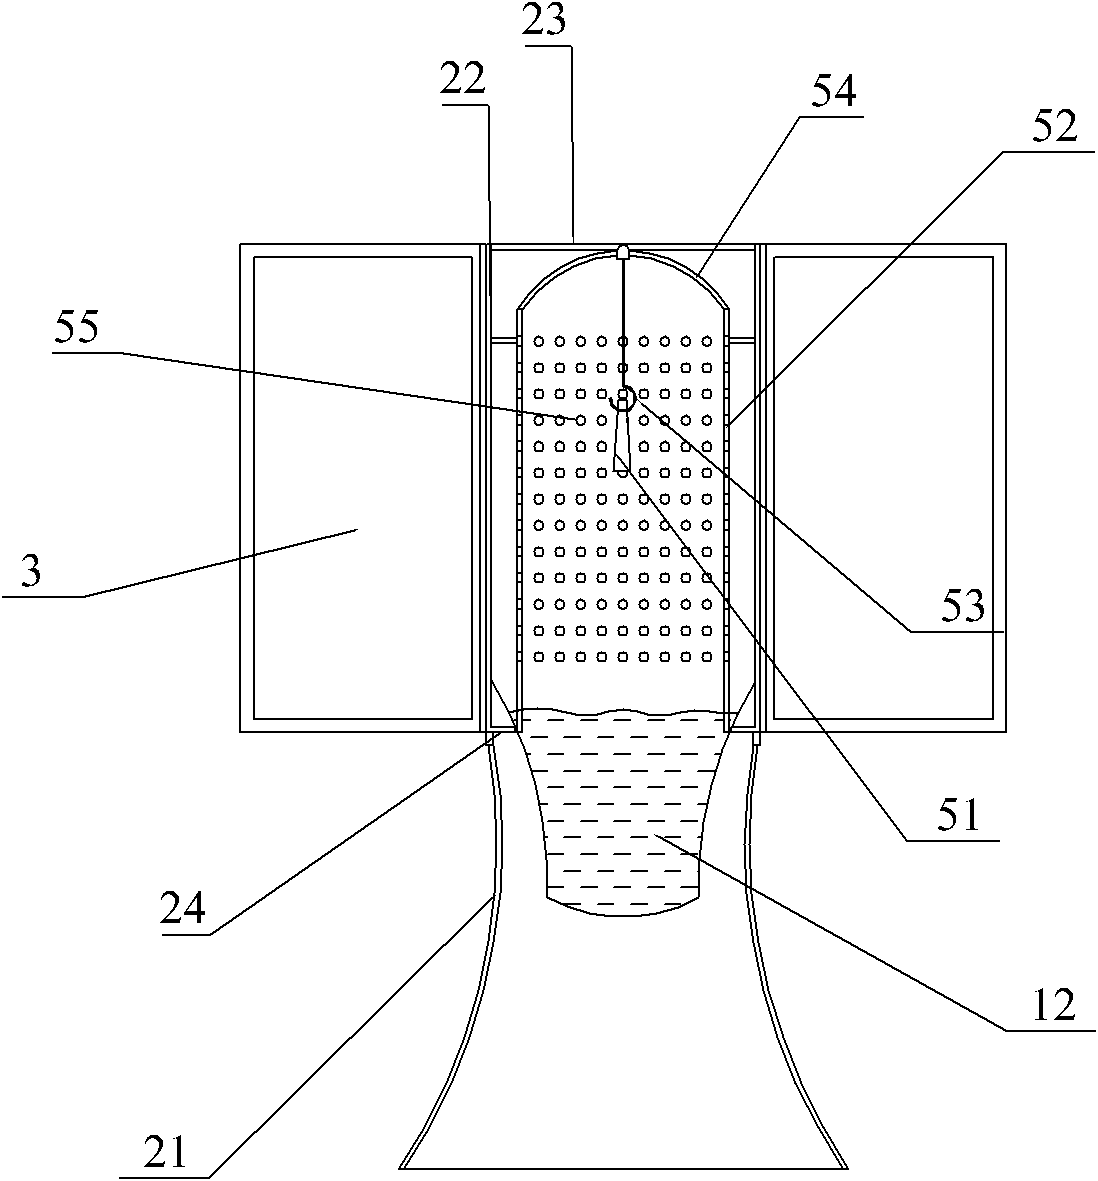 Integrated type pest attracting collection device